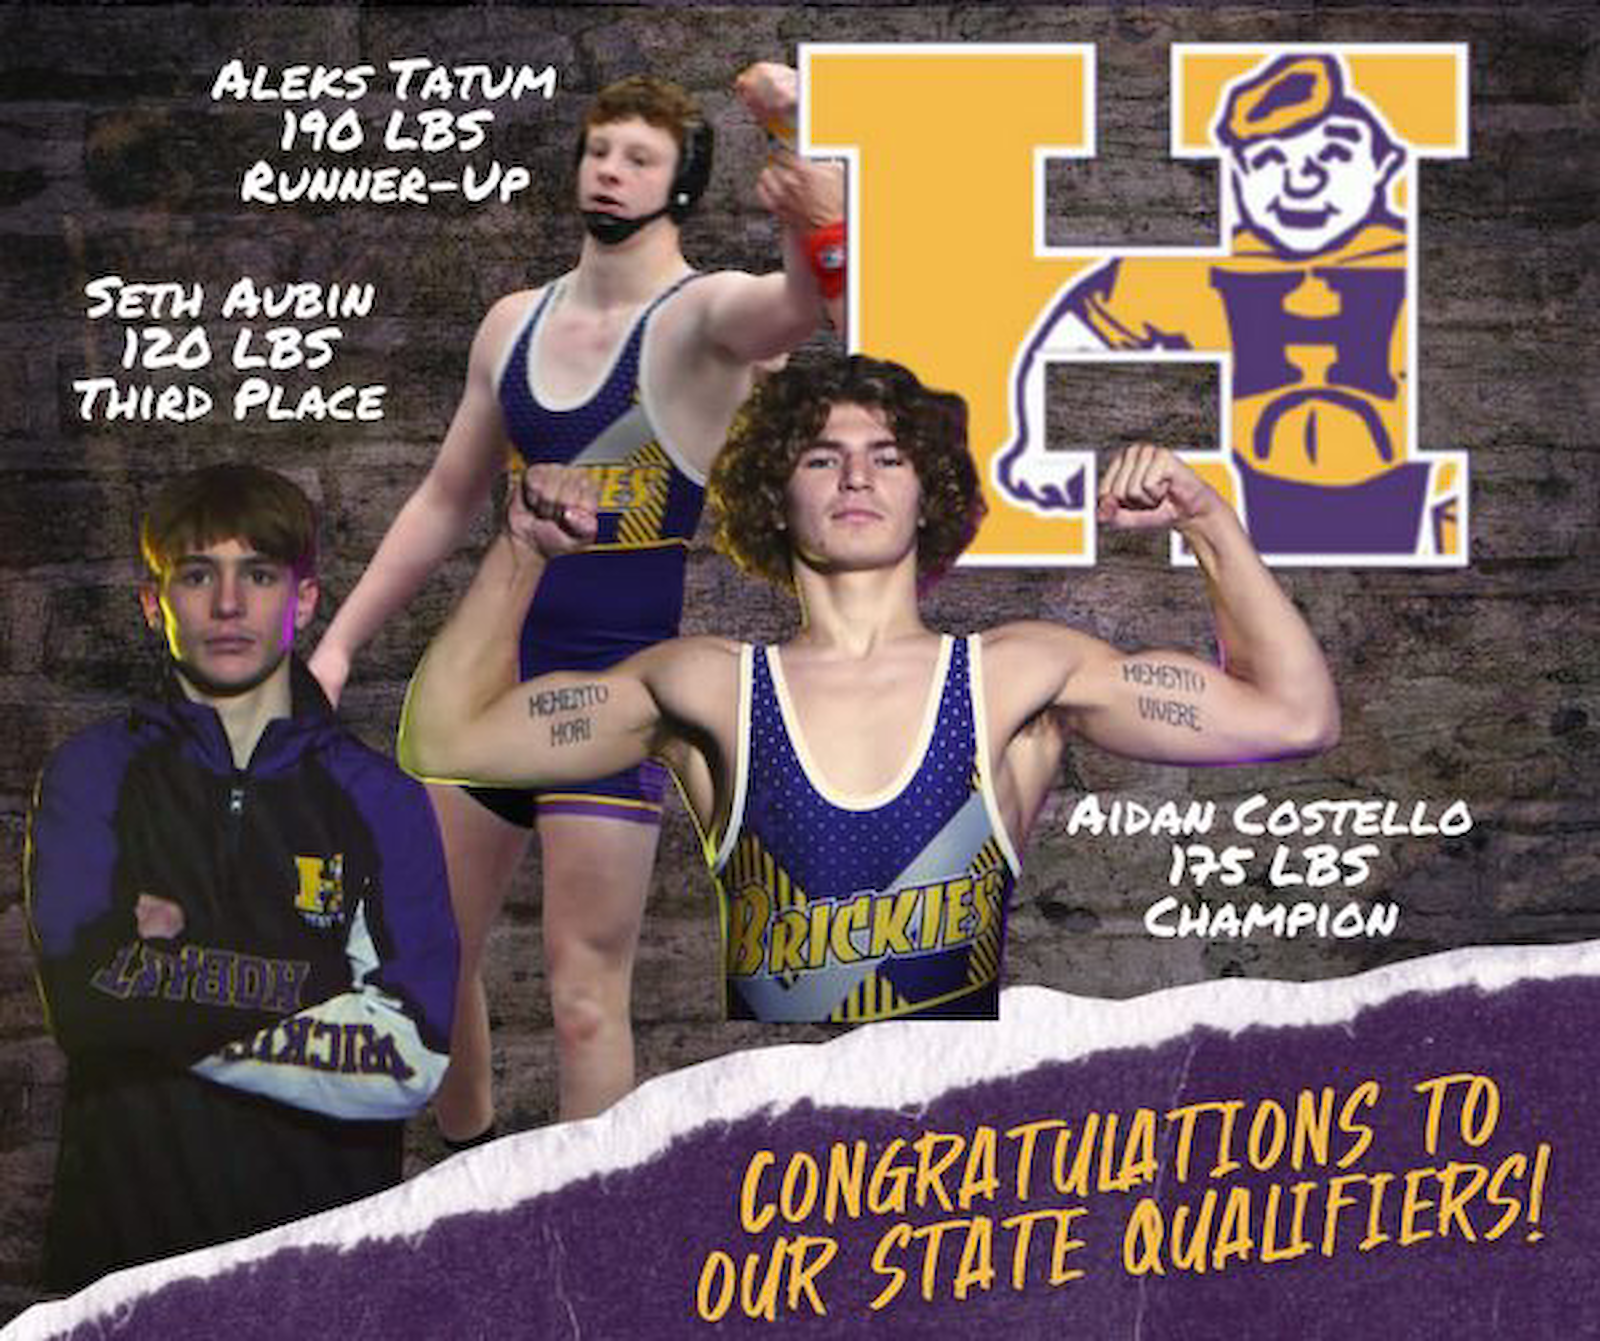 CONGRATULATIONS TO THE WRESTLERS HEADED TO THE STATE FINALS! gallery cover photo